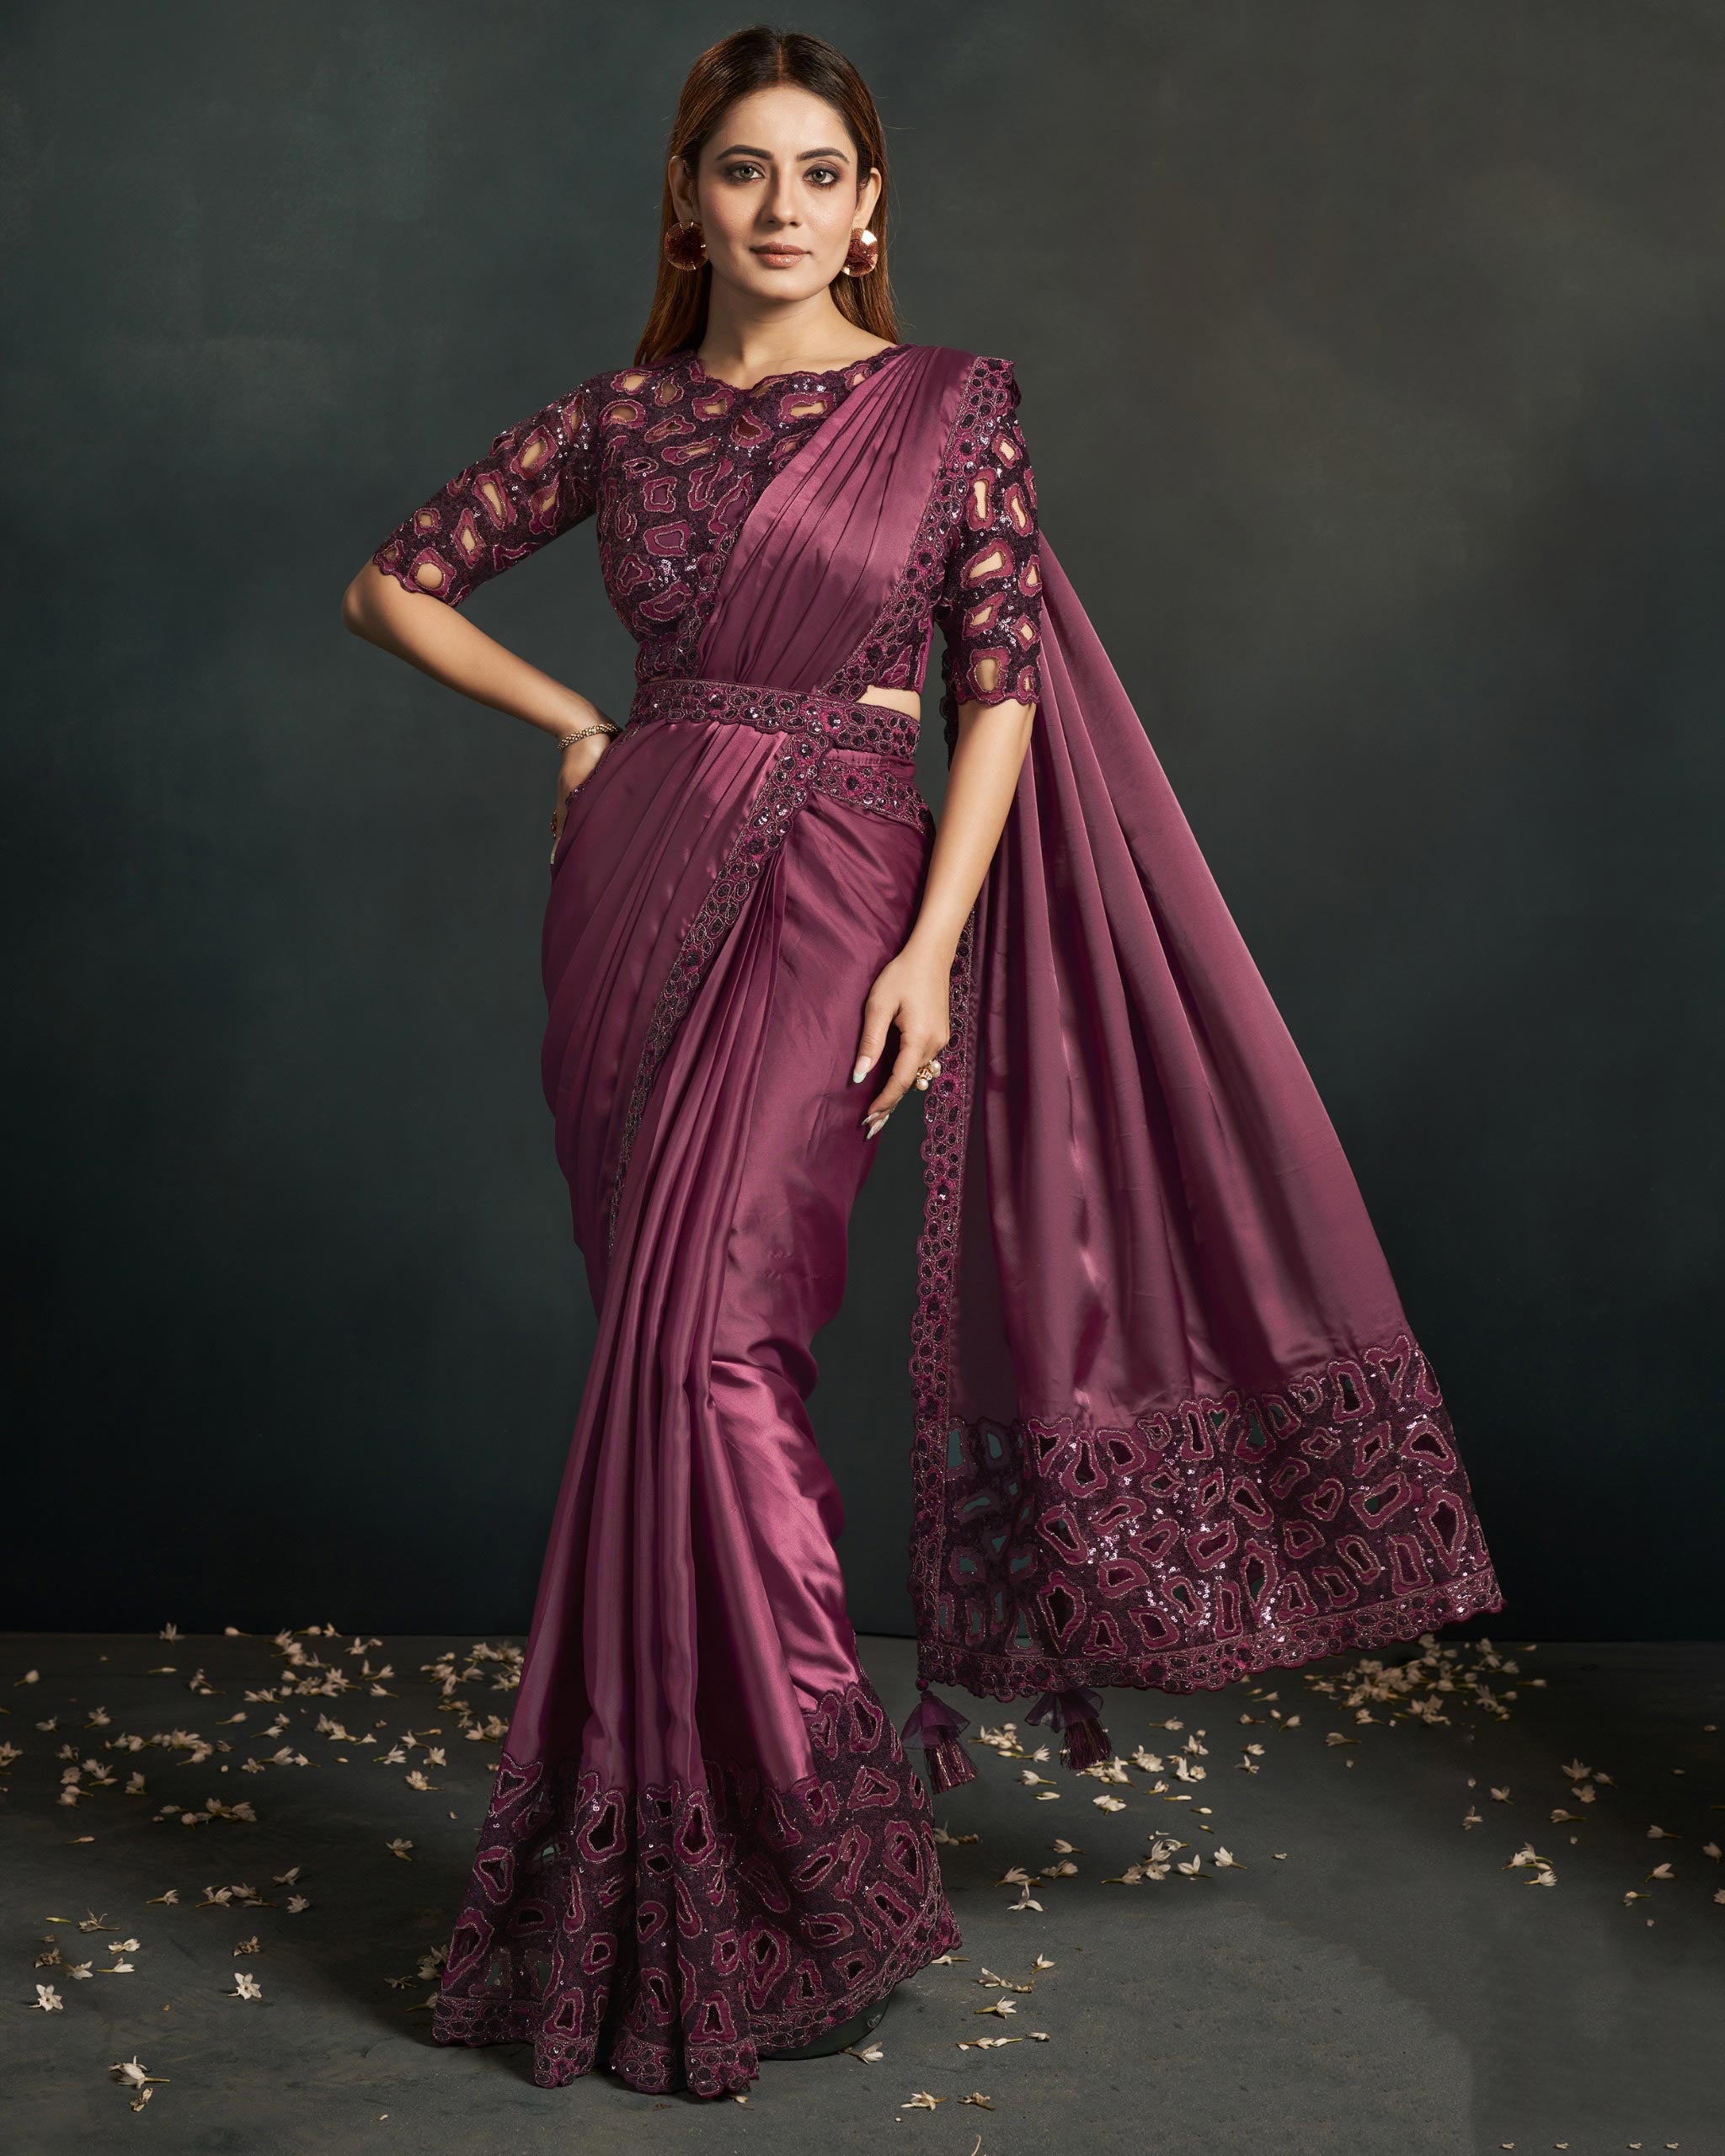 Shop for Satin Crepe Sarees Online at Best Price - Urban Womania